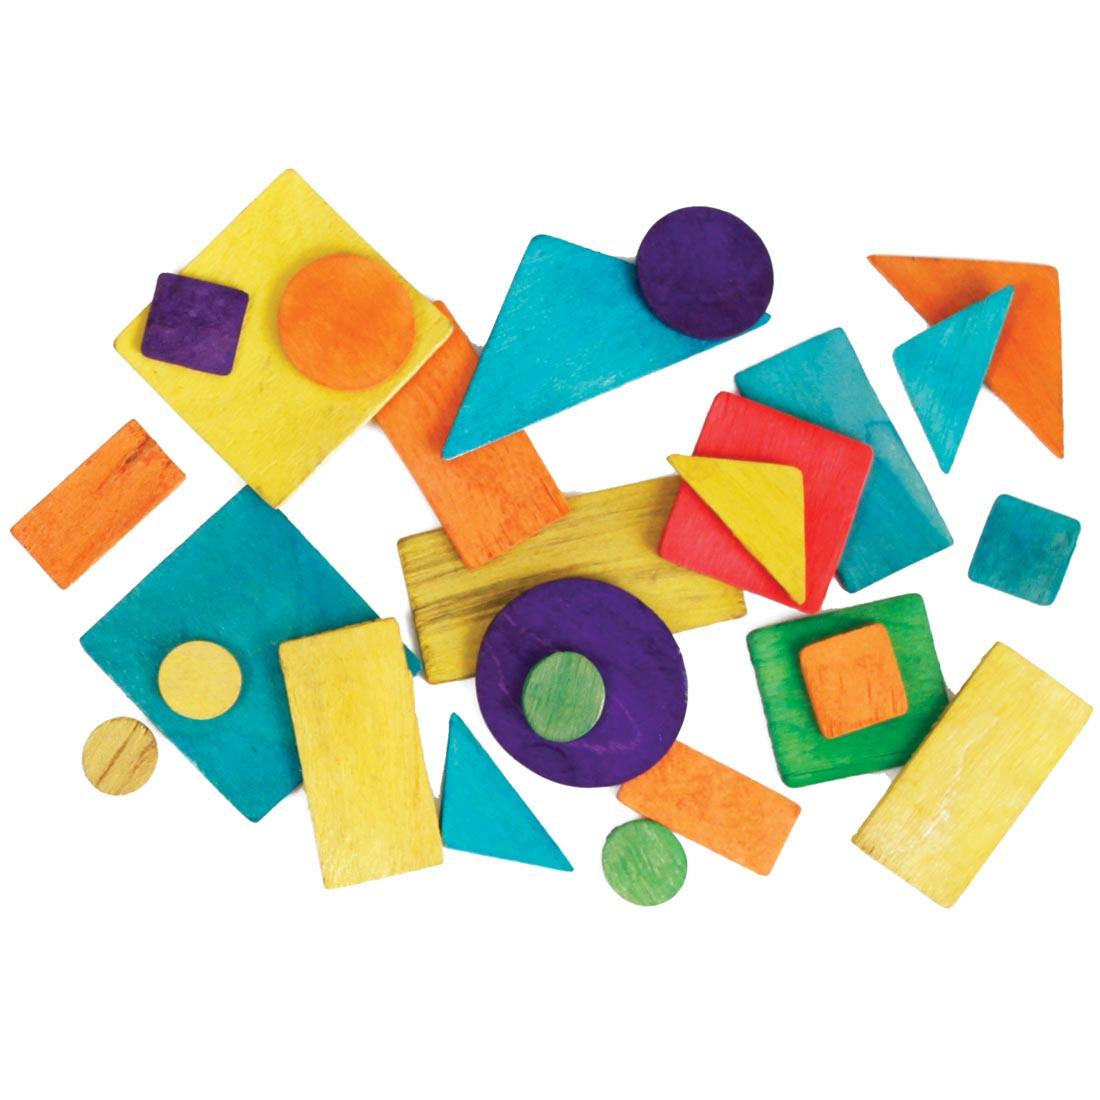 Creativity Street Colored Wood Geometric Shapes in assorted sizes, shapes and colors